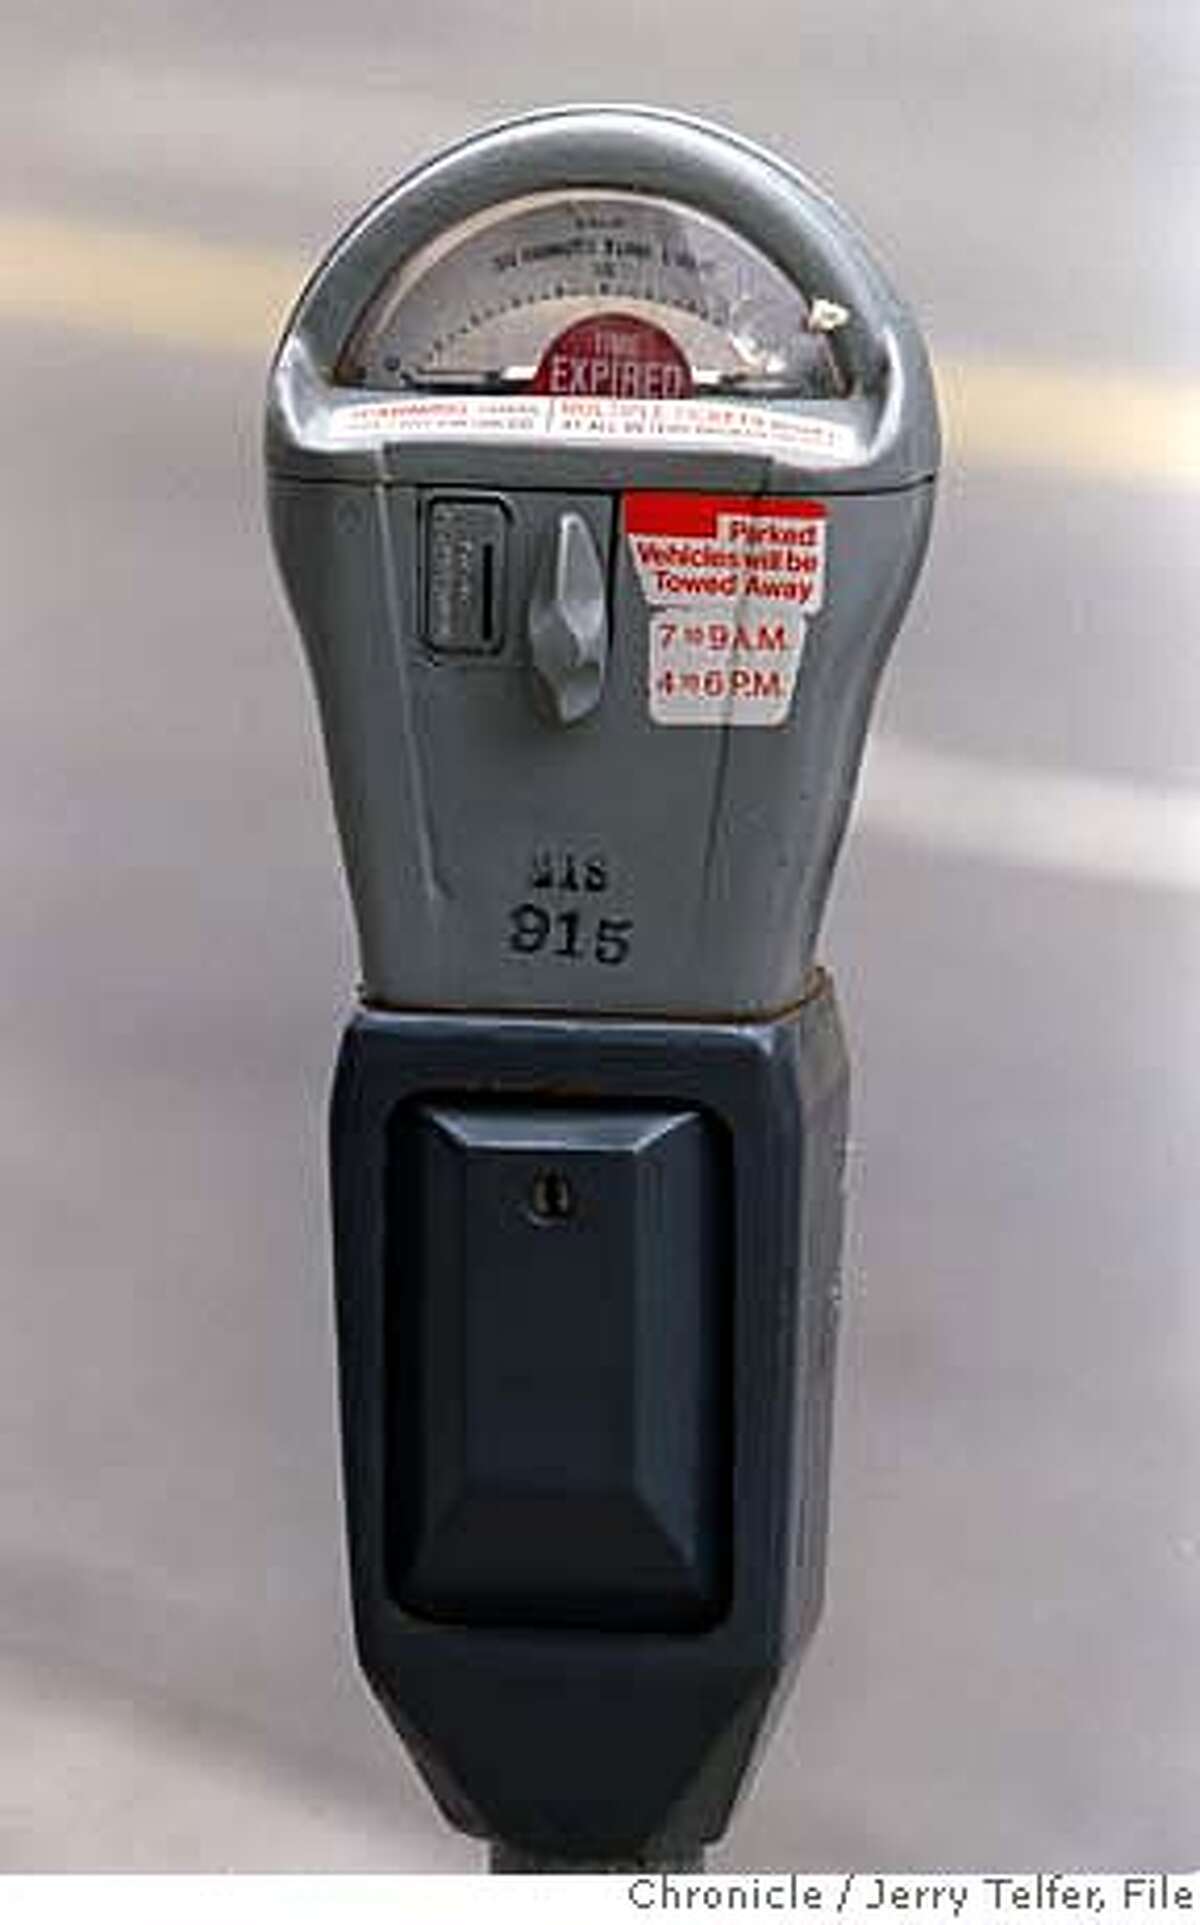 PARKING1/C/02JUL98/MN/JLT SF parking meter, showing "expired" flag. BY JERRY TELFER/THE CHRONICLE